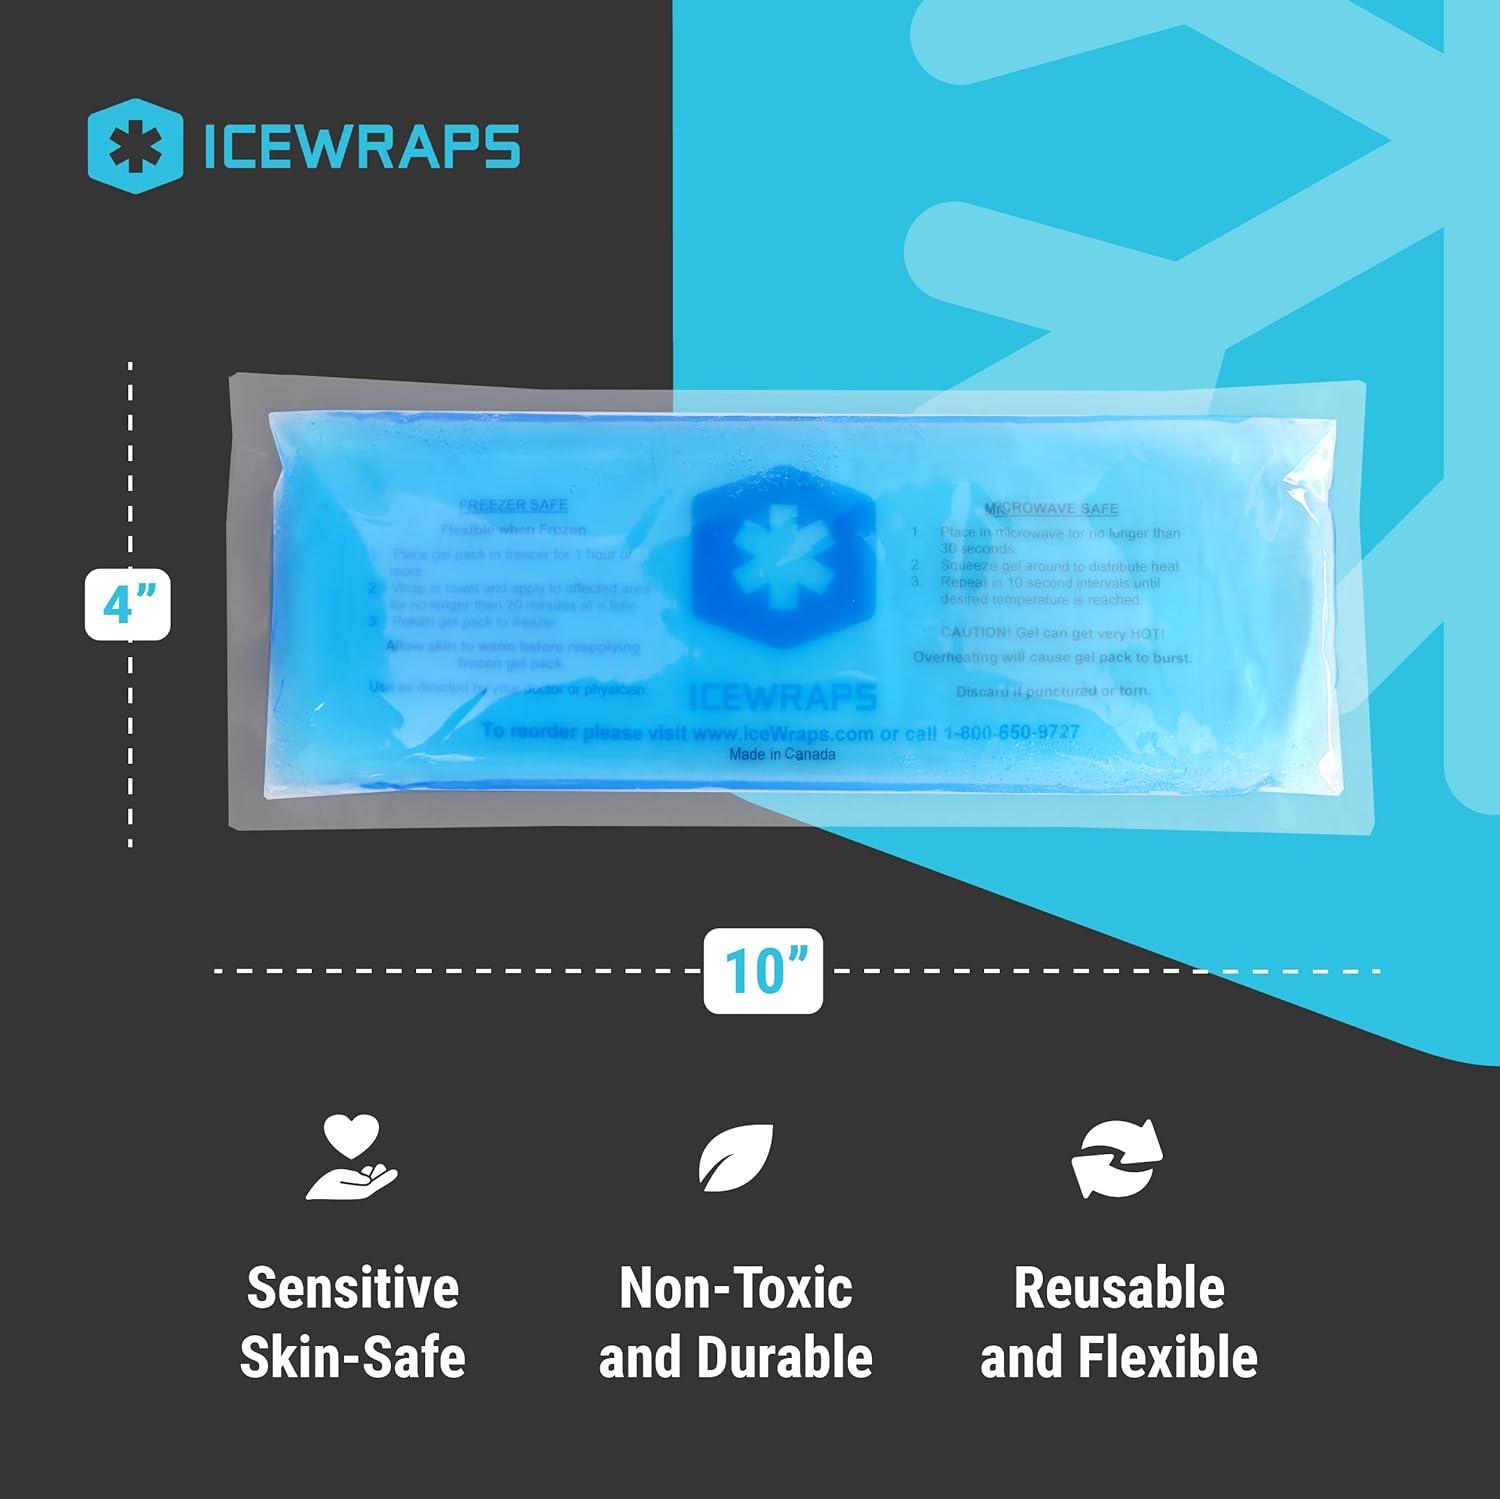 Icewraps 3x5 Gel Pack Reusable Hot or Cold Ice Packs 6 Pack Blue